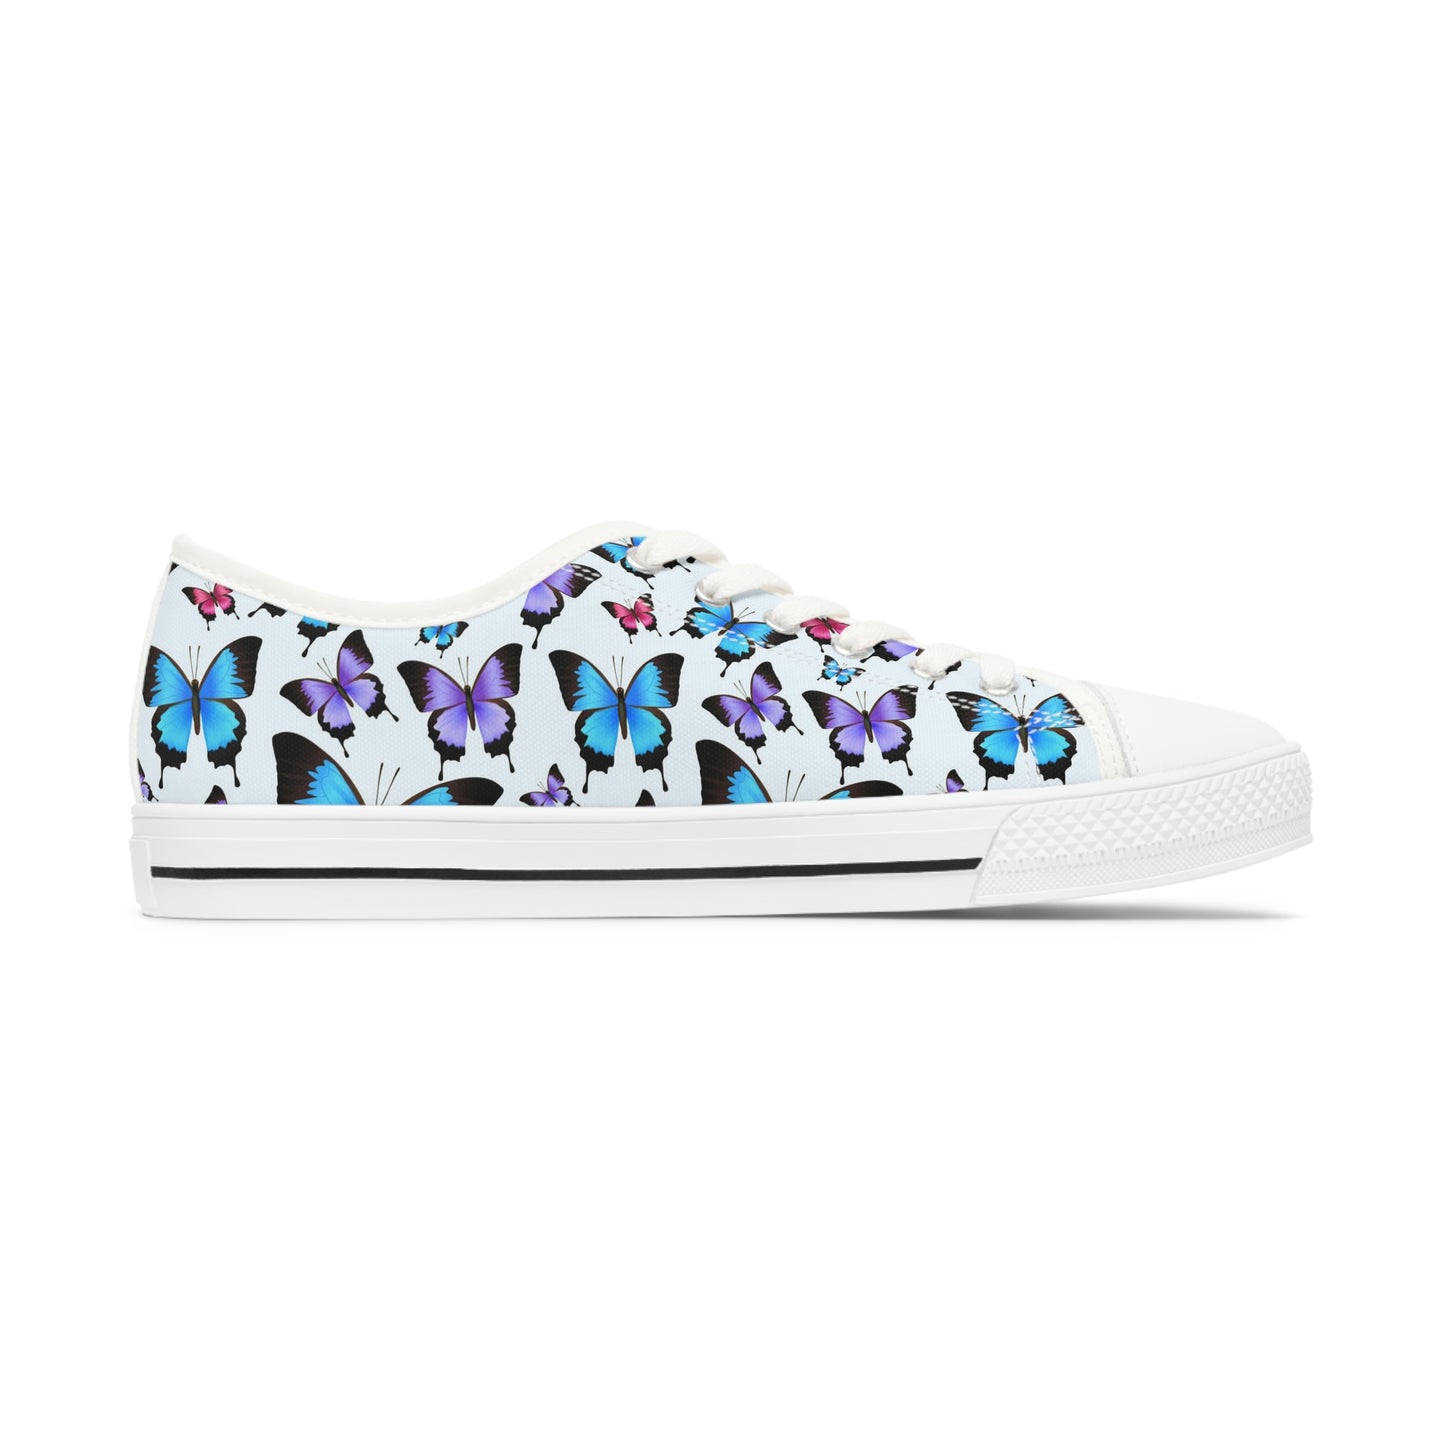 Butterfly Women Shoes, Monarch Blue Sneakers Canvas White Low Top Lace Up Custom Girls Aesthetic Flat Shoes